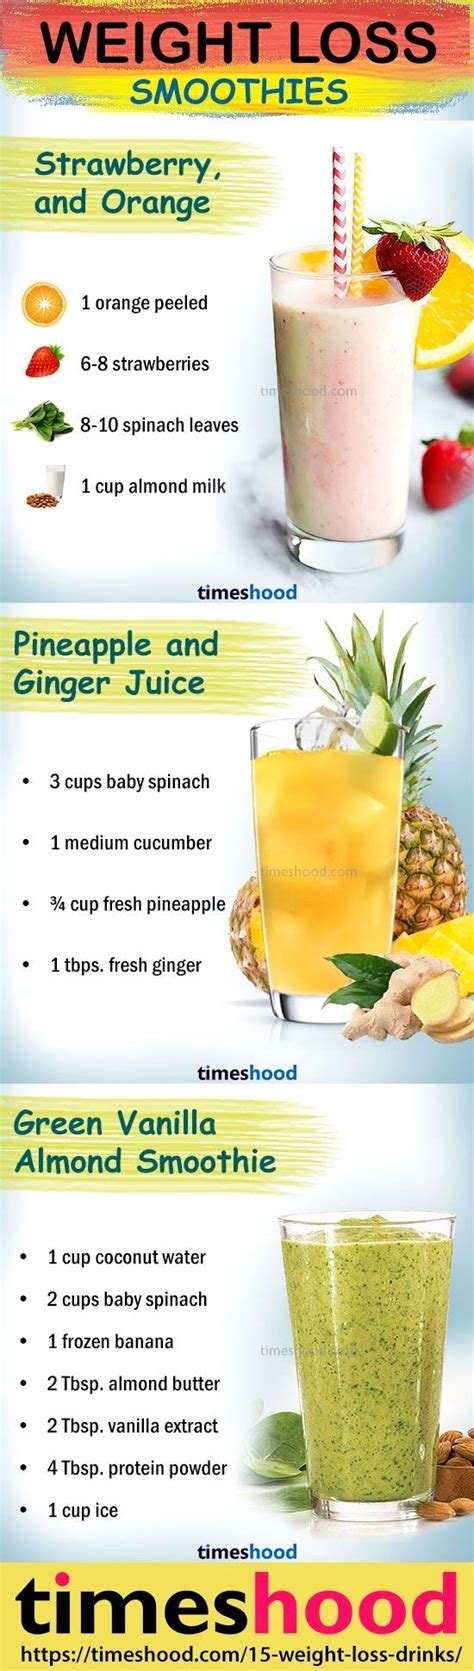 Healthy Smoothie Recipes For Weight Loss Pinterest Food And Recipe Ideas